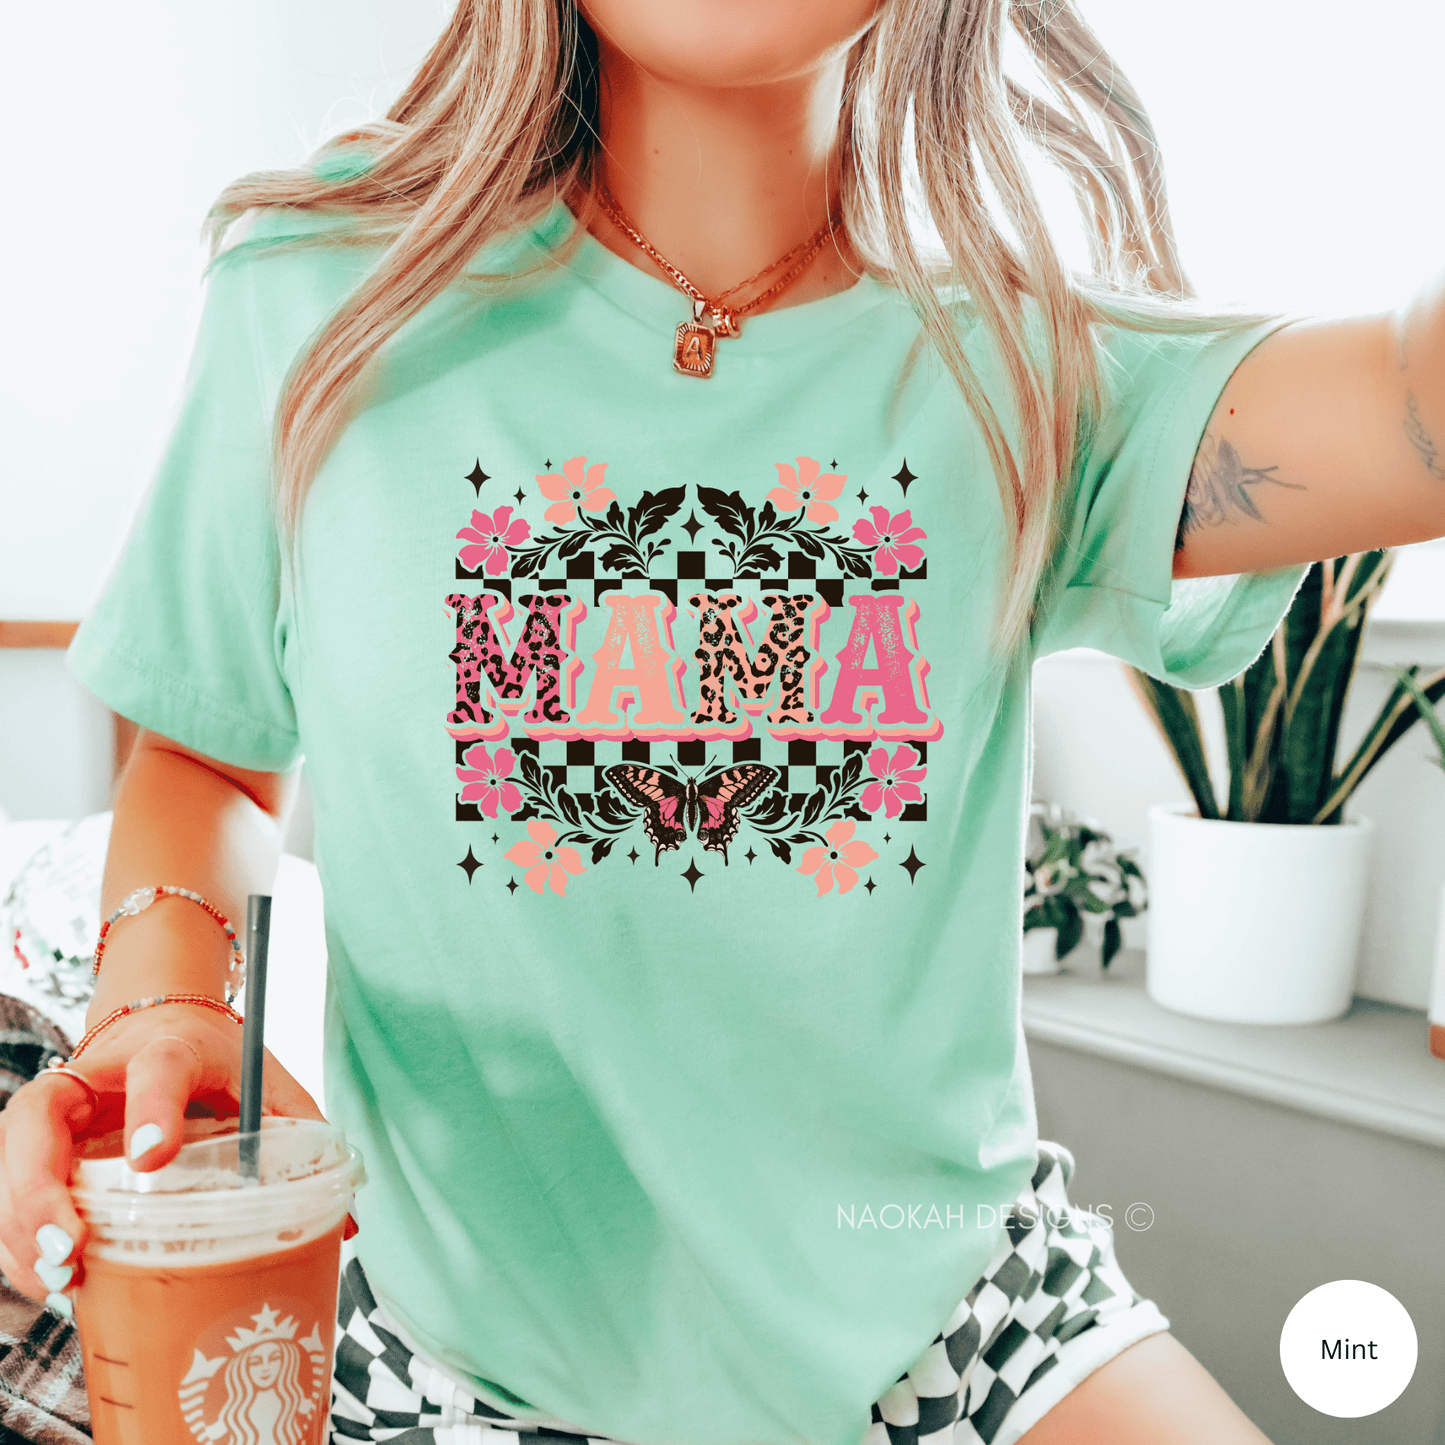 mama floral butterfly shirt, mothers day gift, mom t-shirt, floral shirt, butterfly shirt, flower shirt, women tees, mothers day shirt